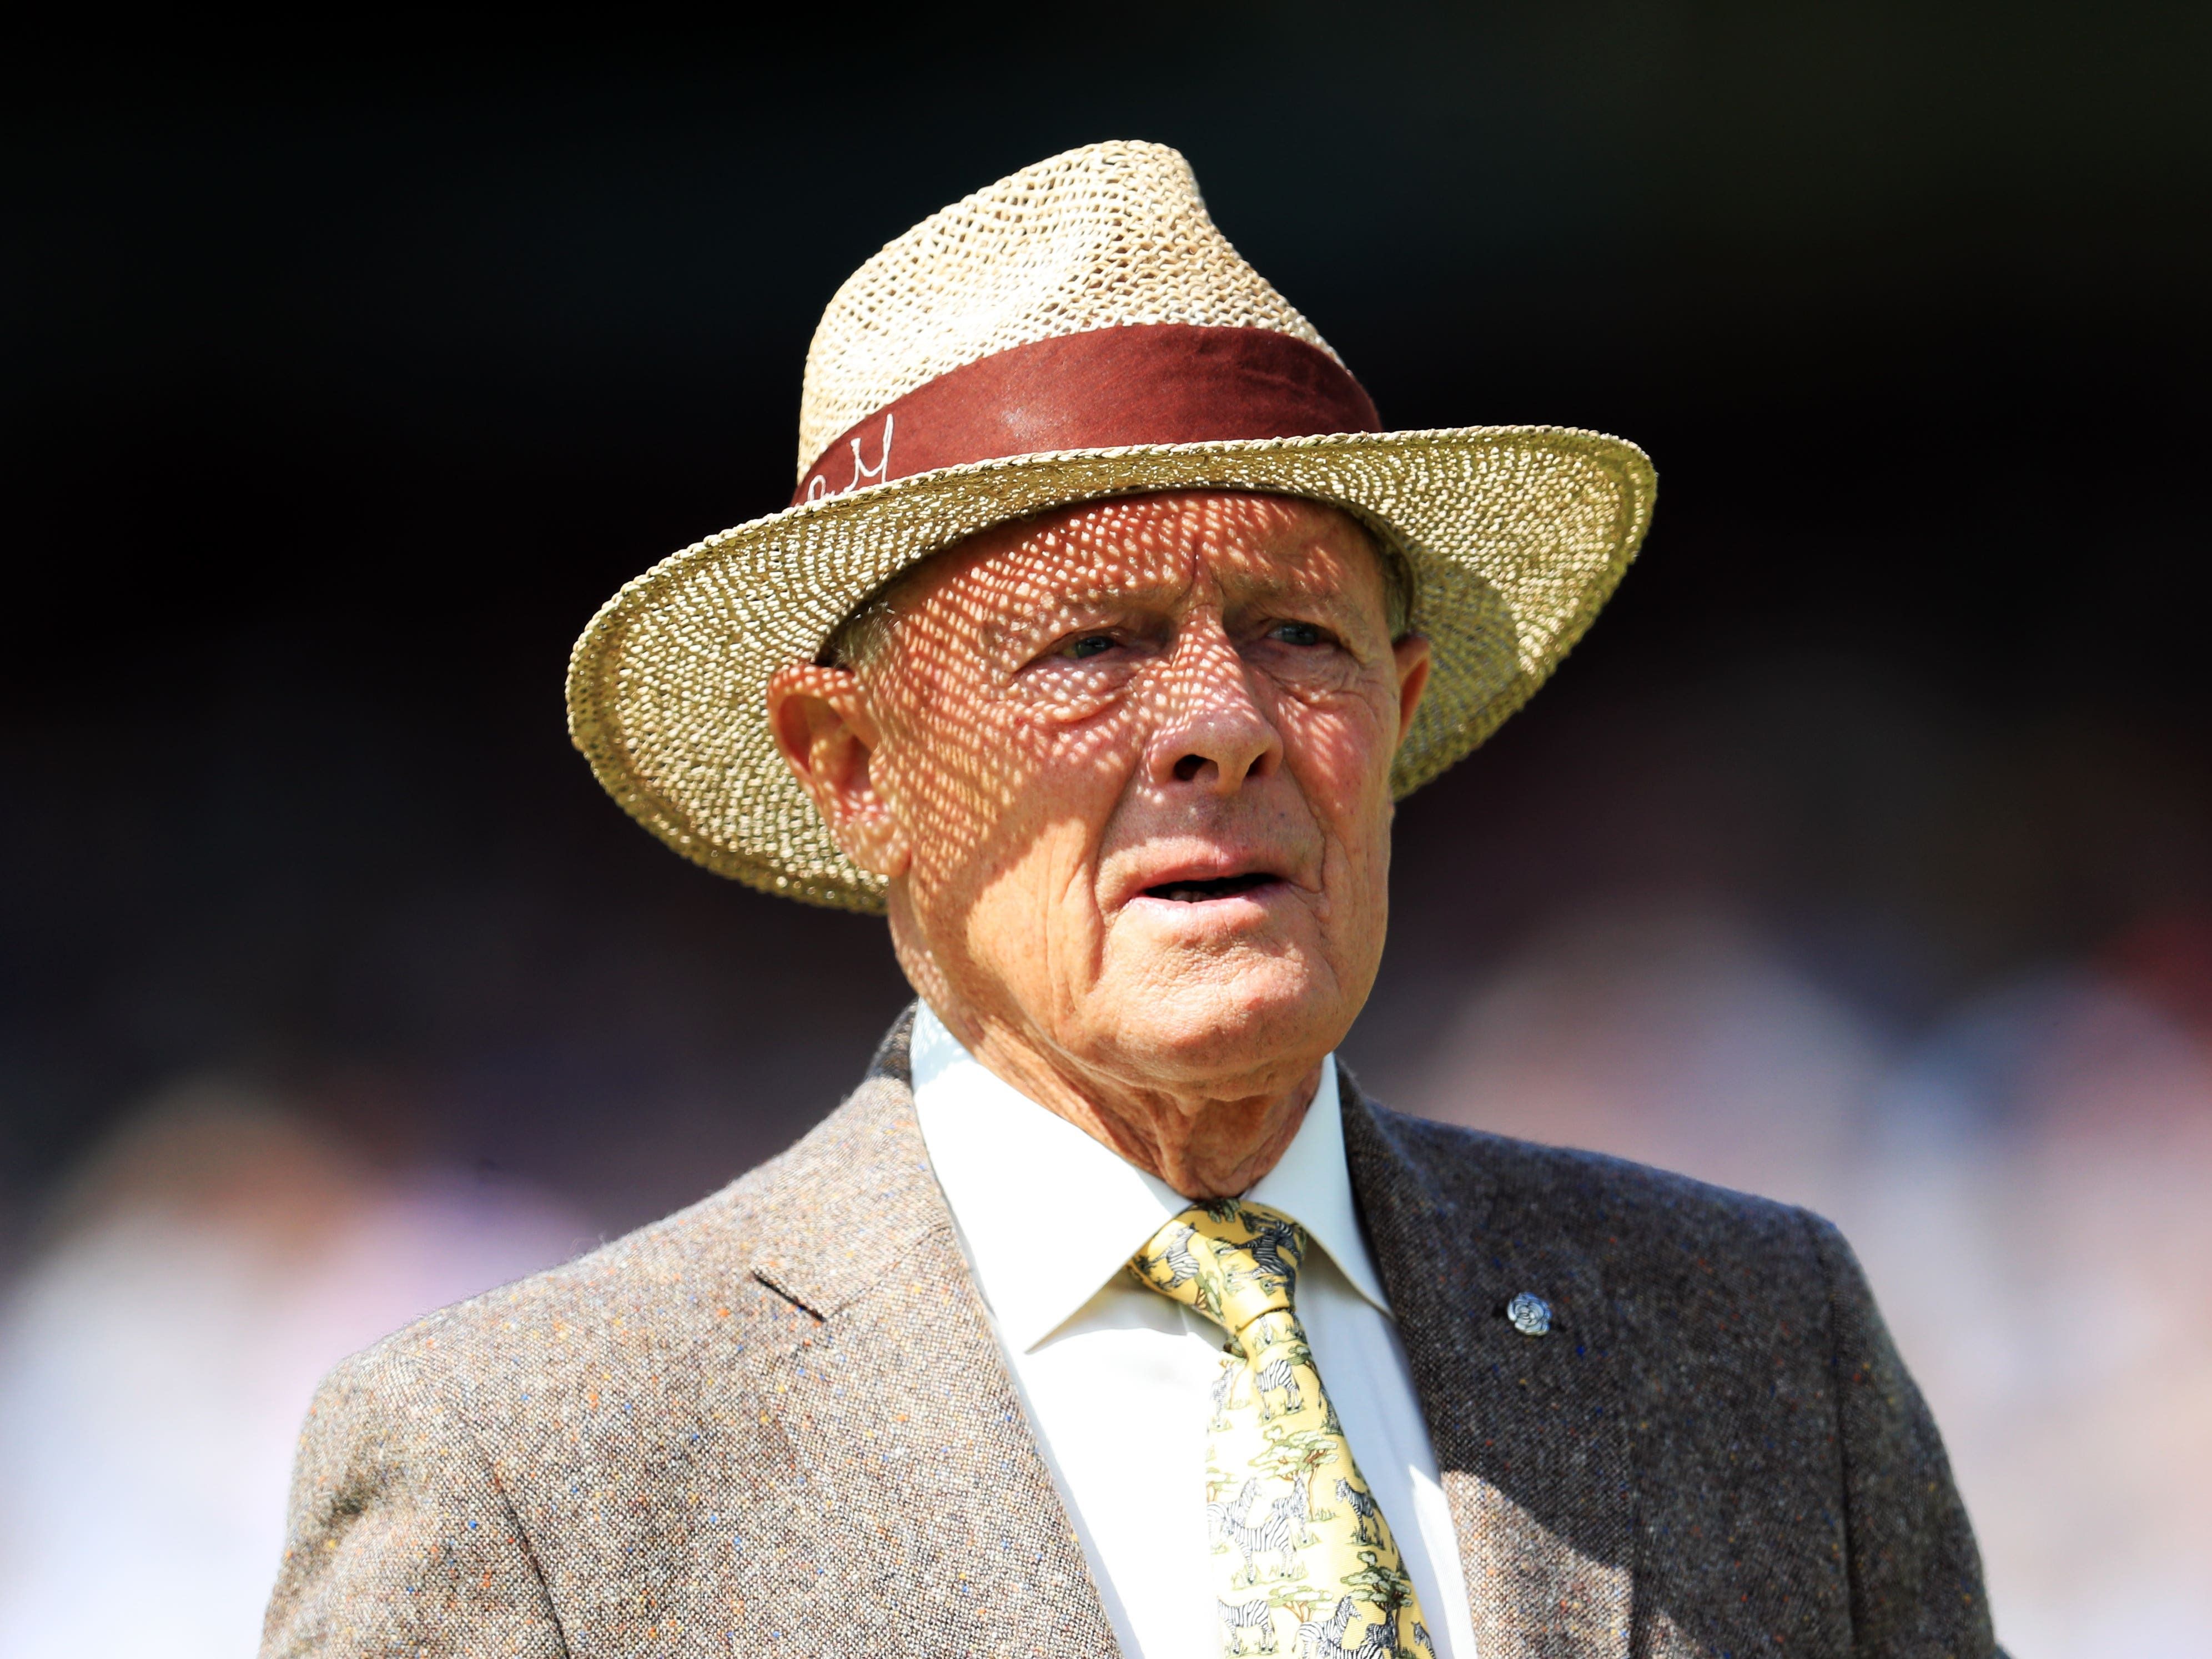 Sir Geoffrey Boycott: I’m alive because of the quick thinking of my wife Rachael